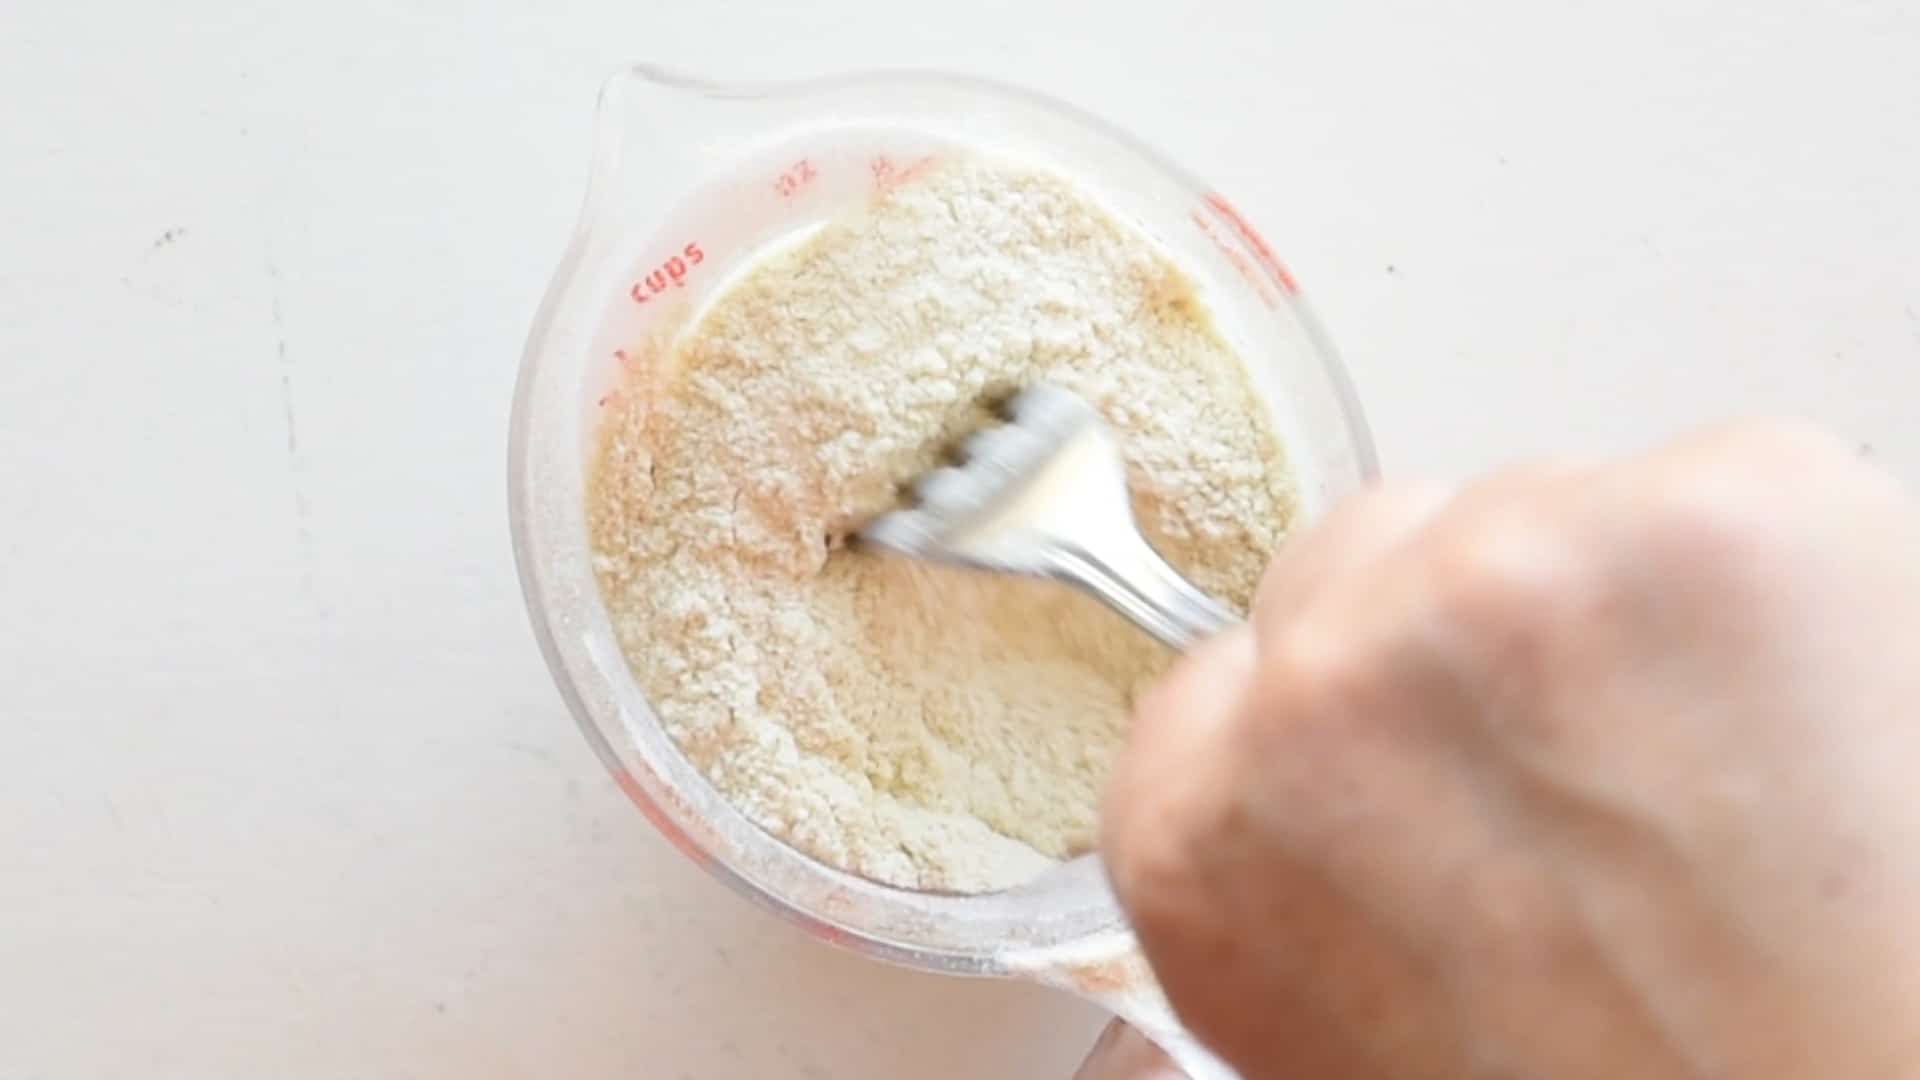 Mix the yeast with the remaining flour